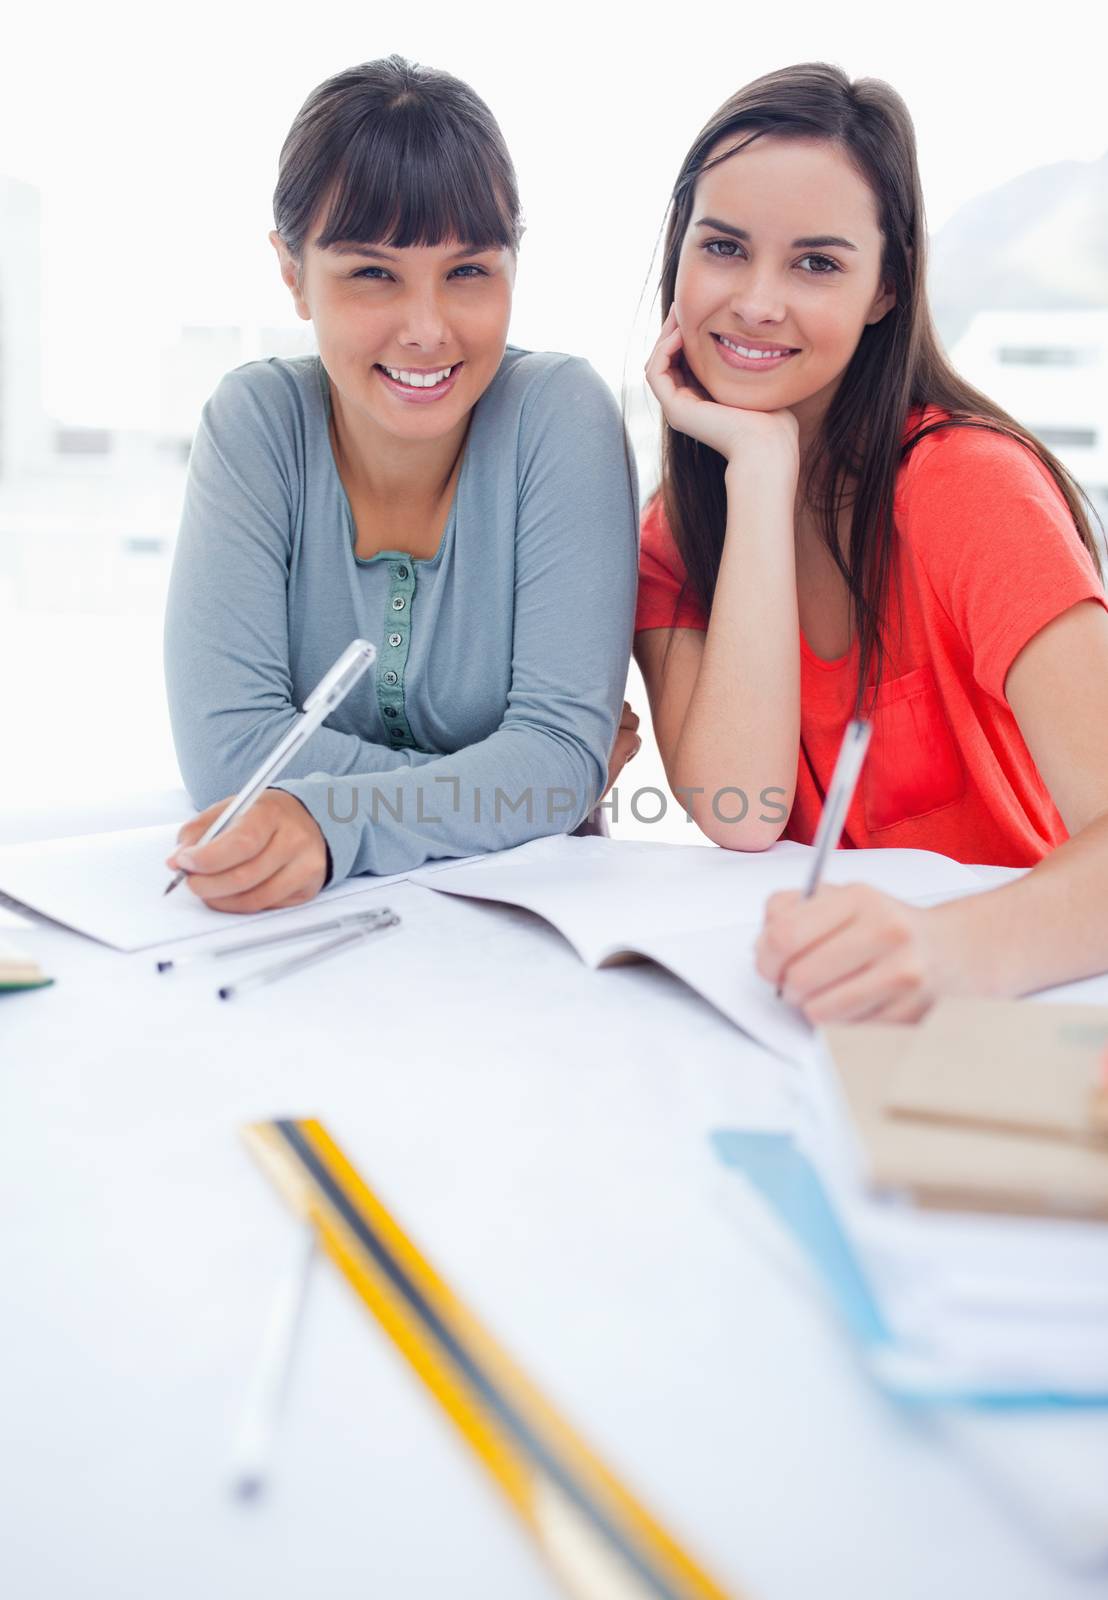 A pair of smiling girls looking at the camera as they work on schoolwork by Wavebreakmedia